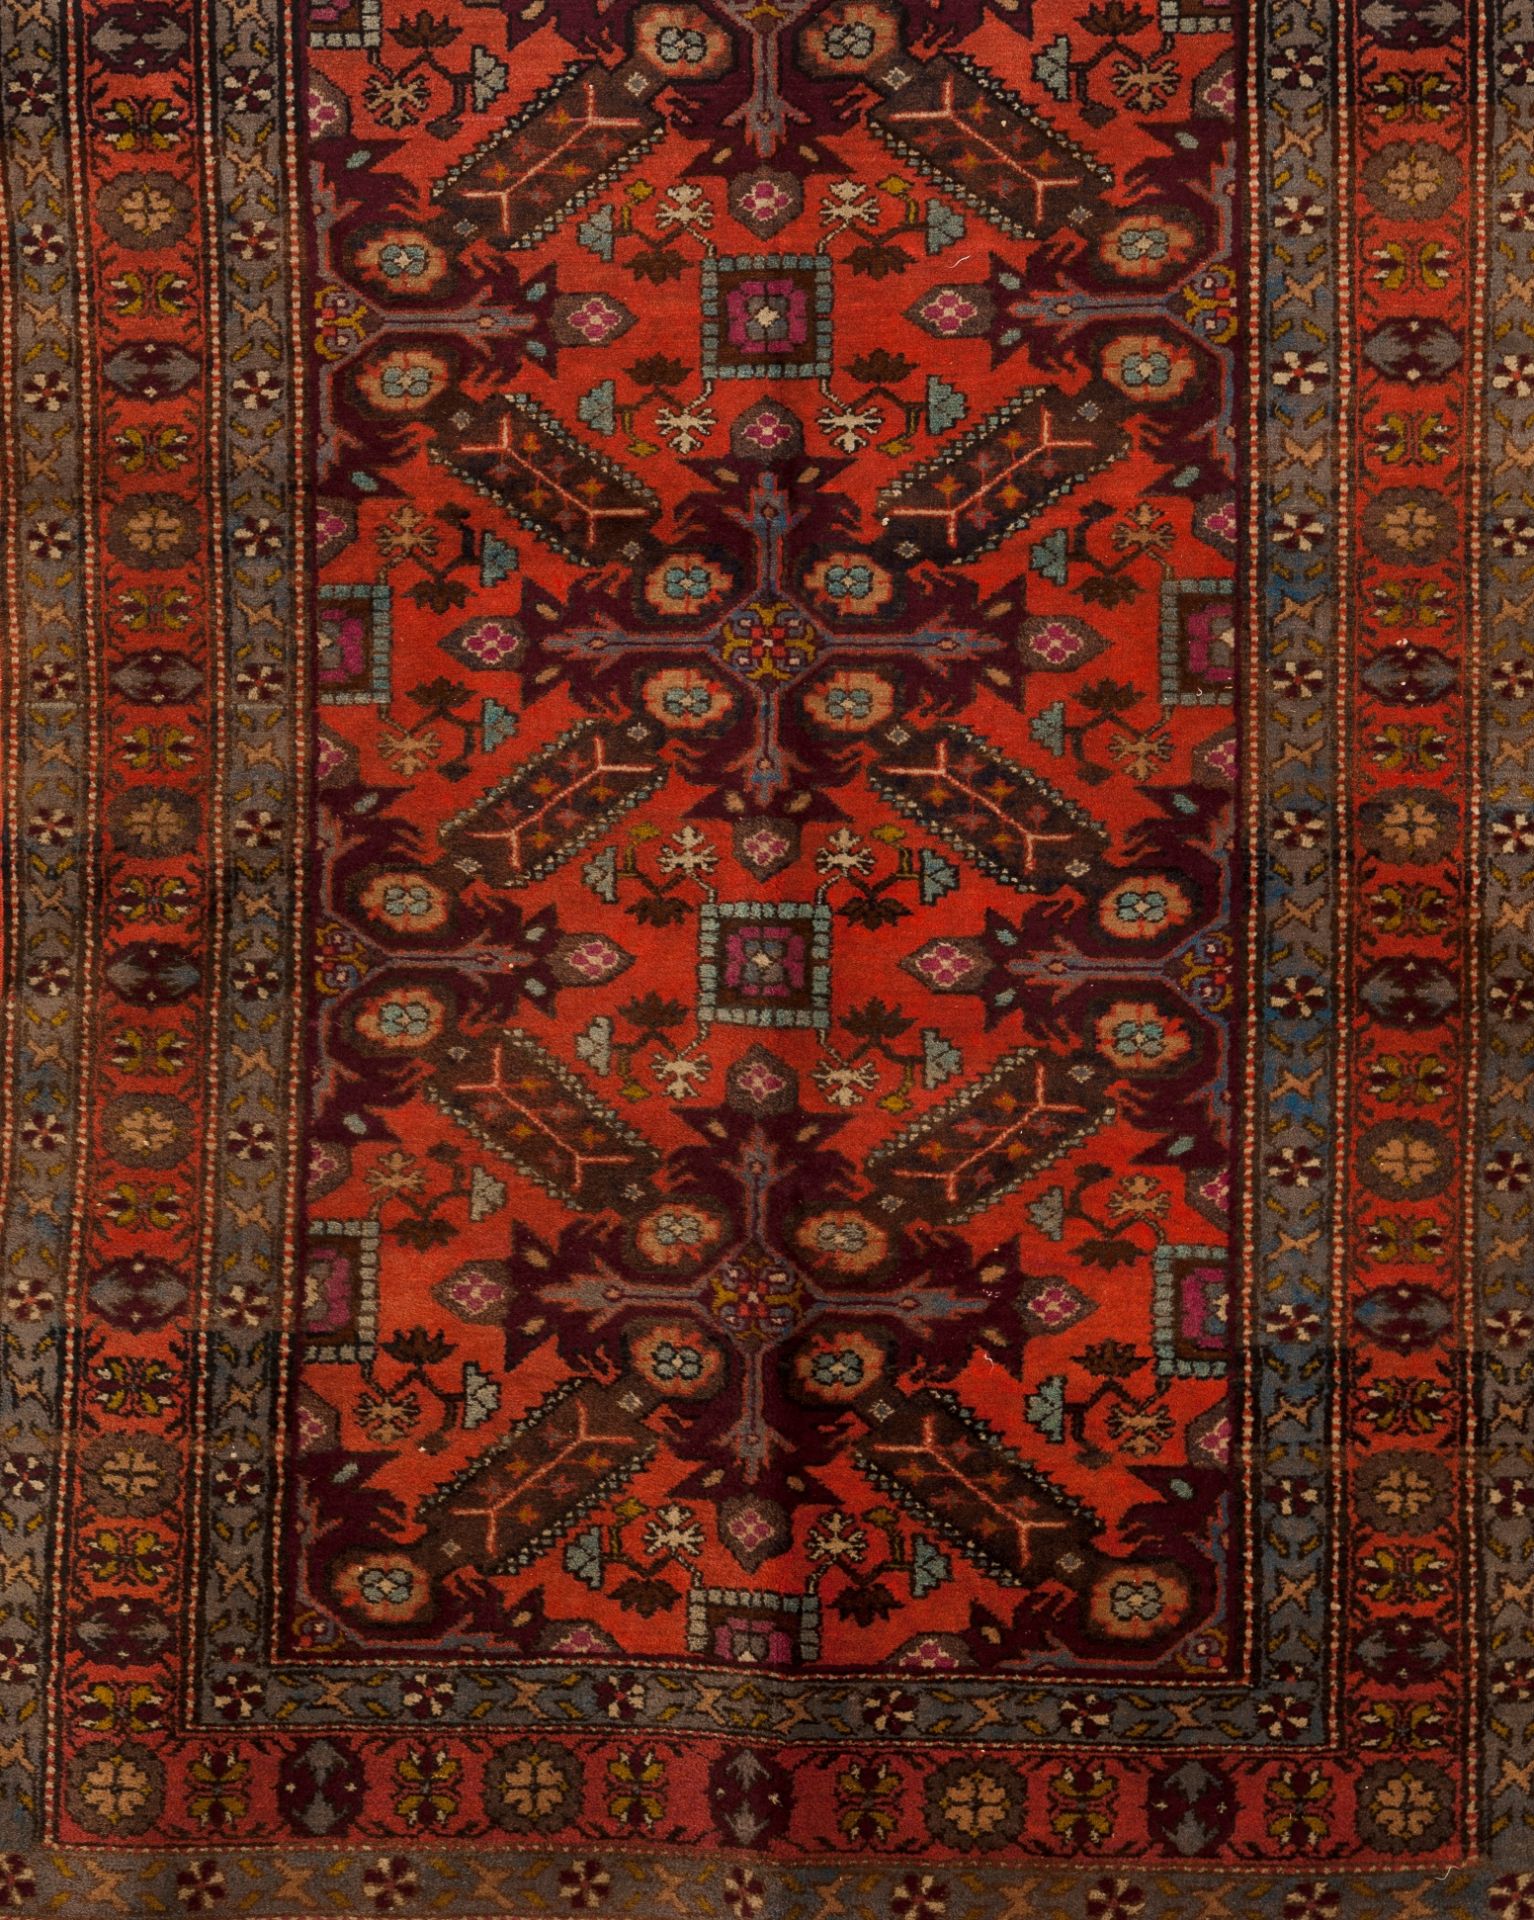 A Russian rug, CaucasusWool of geometric and floral pattern in salmon, beige and blue shades